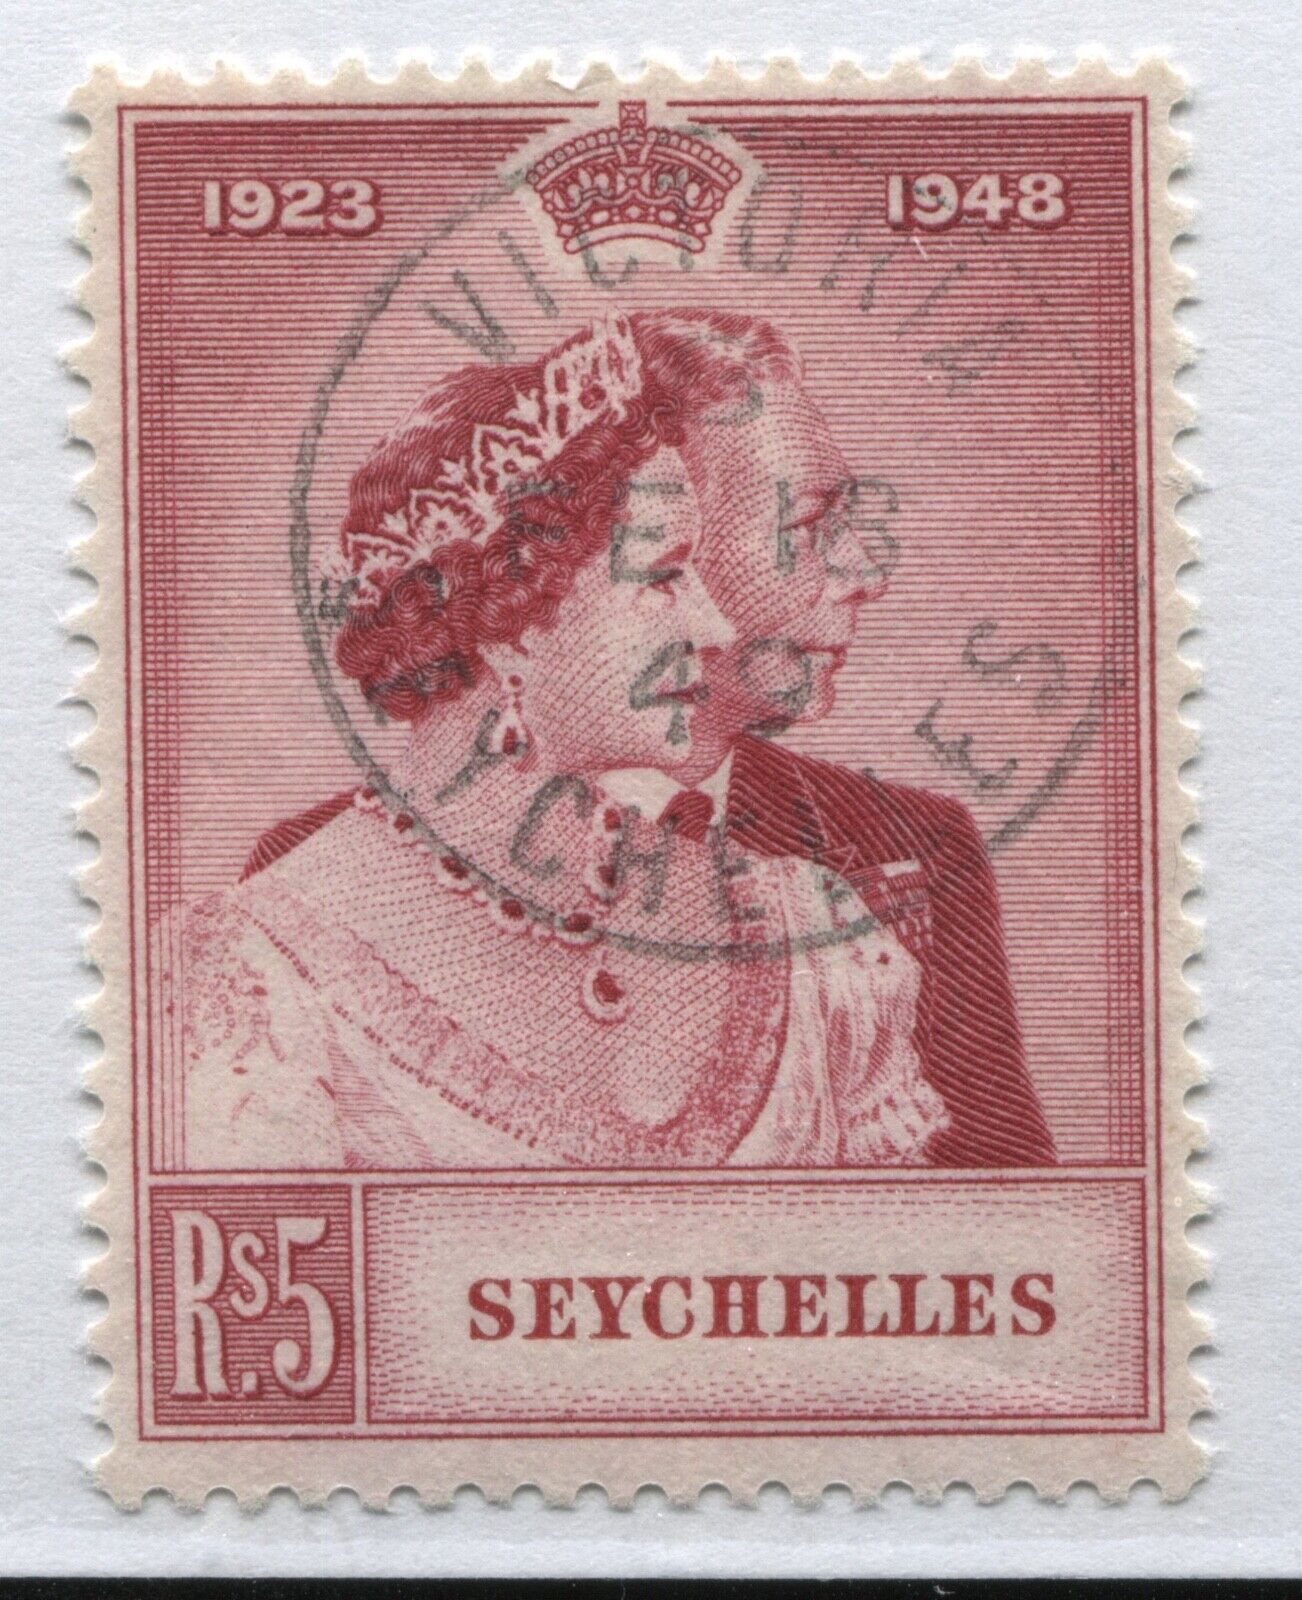 Seychelles KGVI 1948 Silver Wedding 5 rupees used